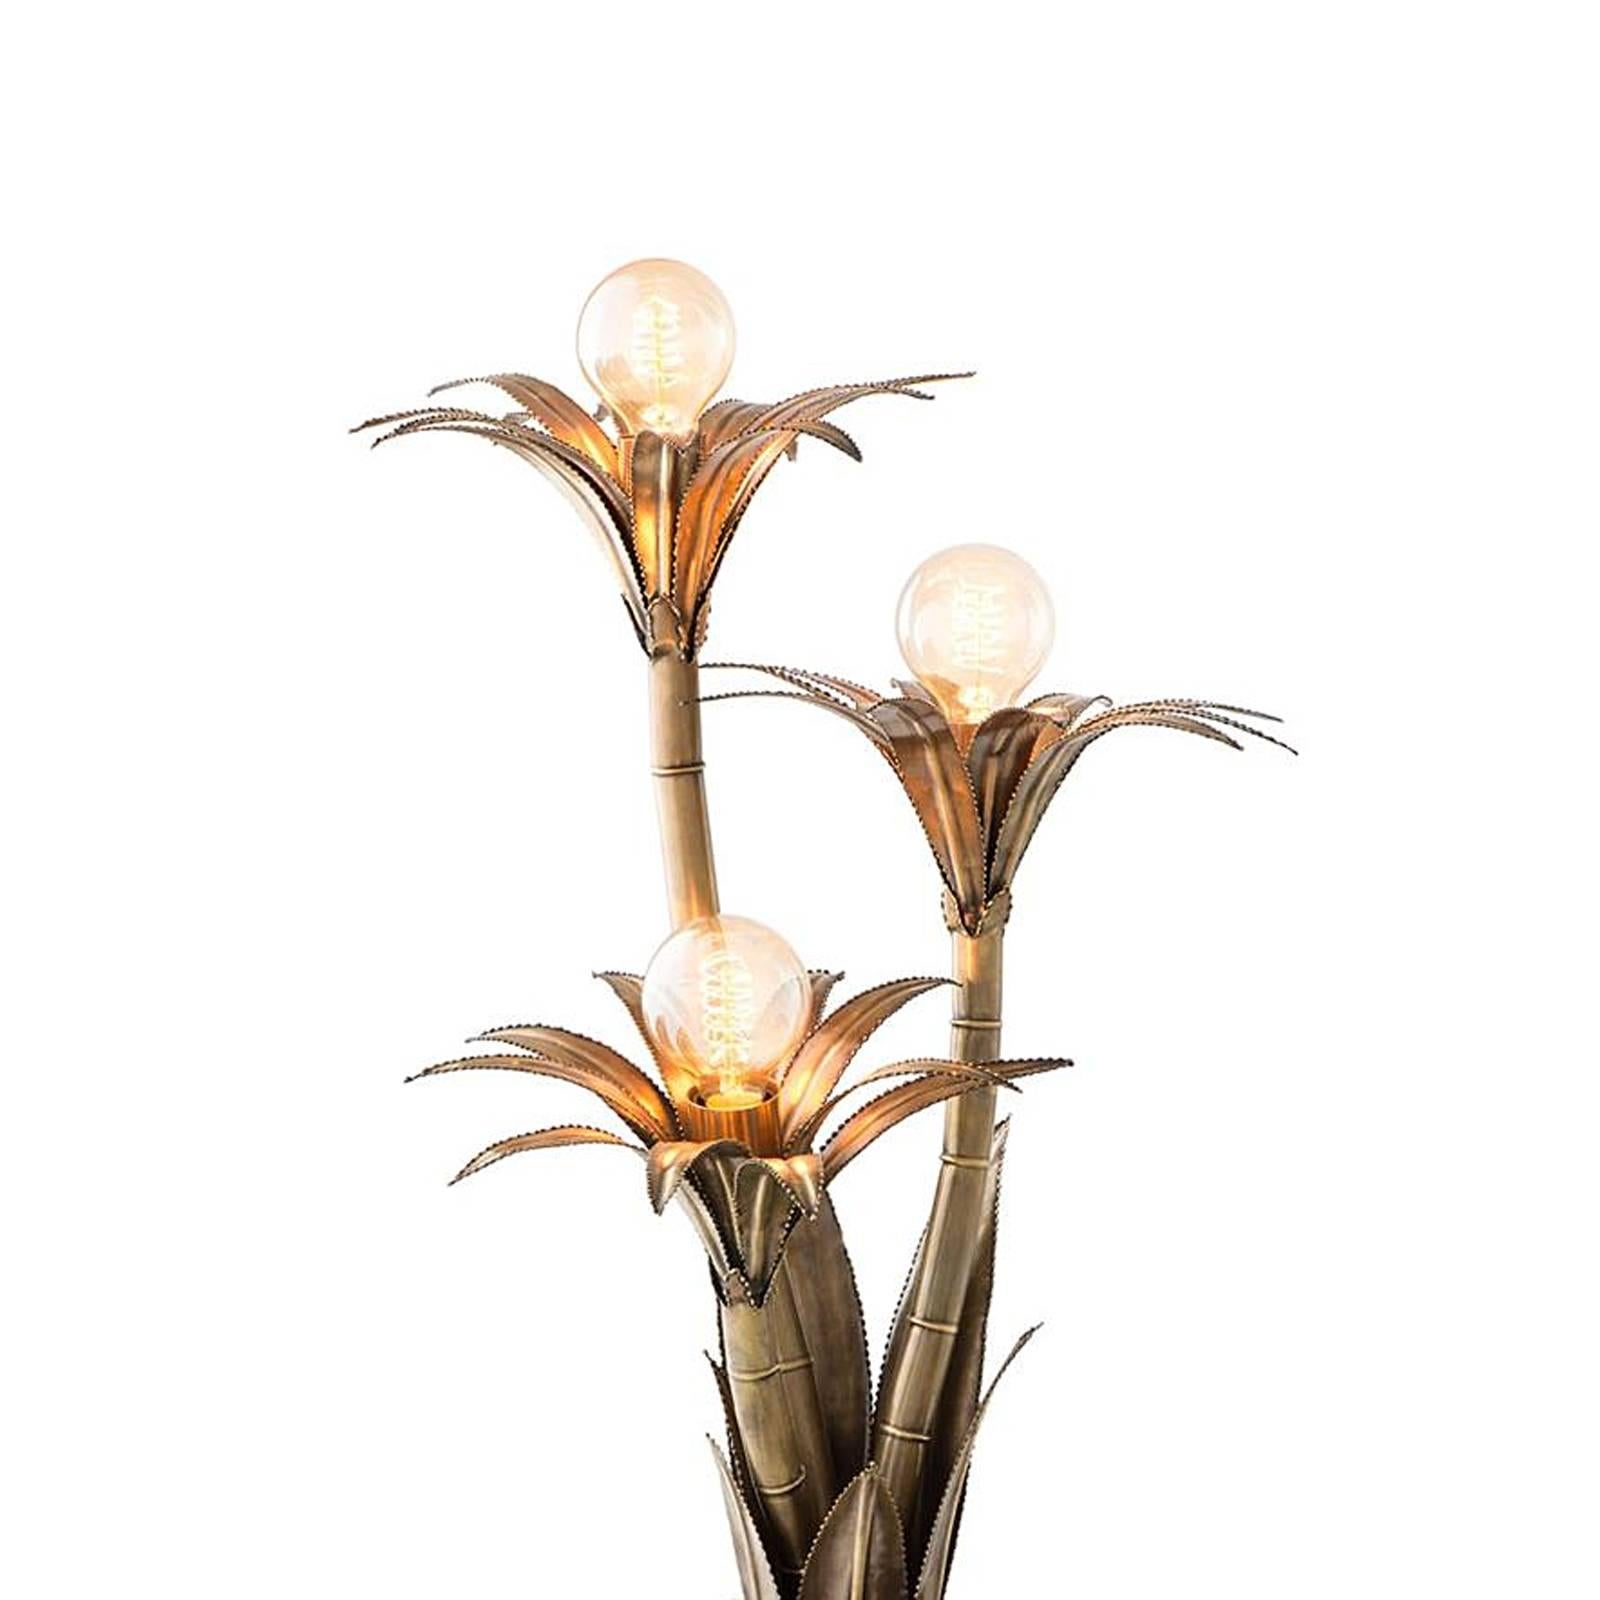 Table lamp palm flowers in vintage brass finish.
Hand-hammered brass shape. On black base.
